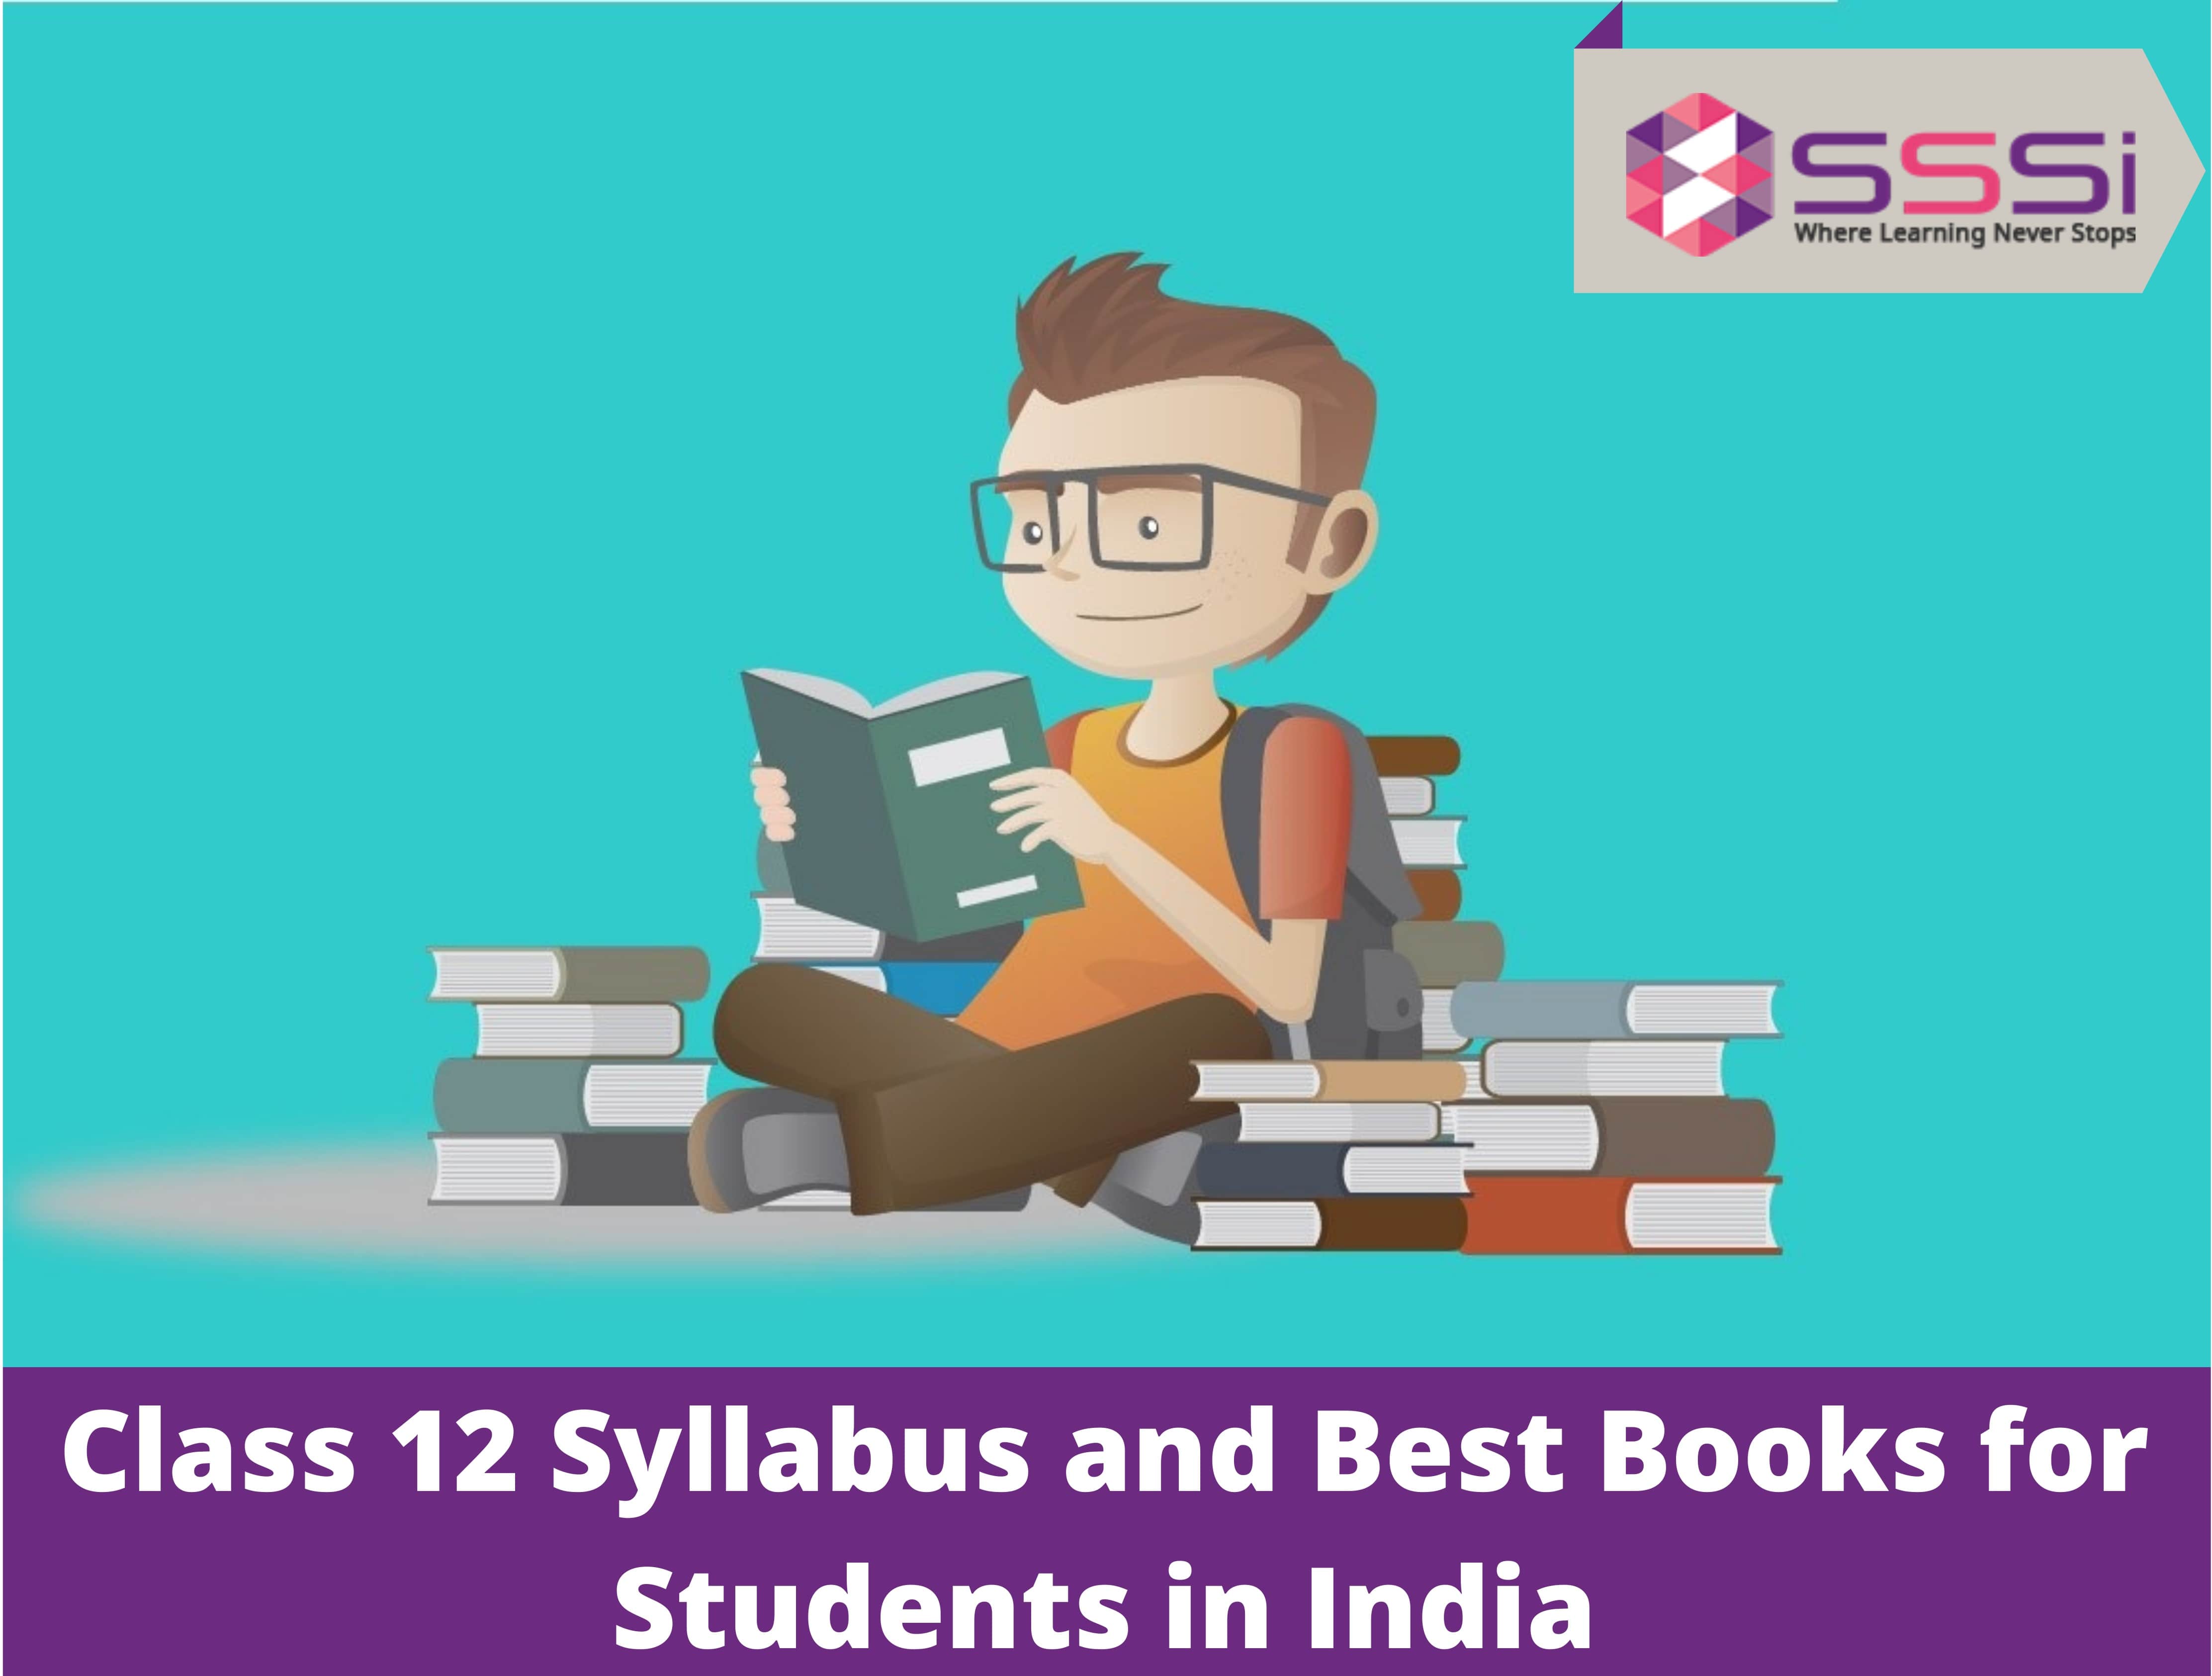 Class 12 Syllabus and Best Books